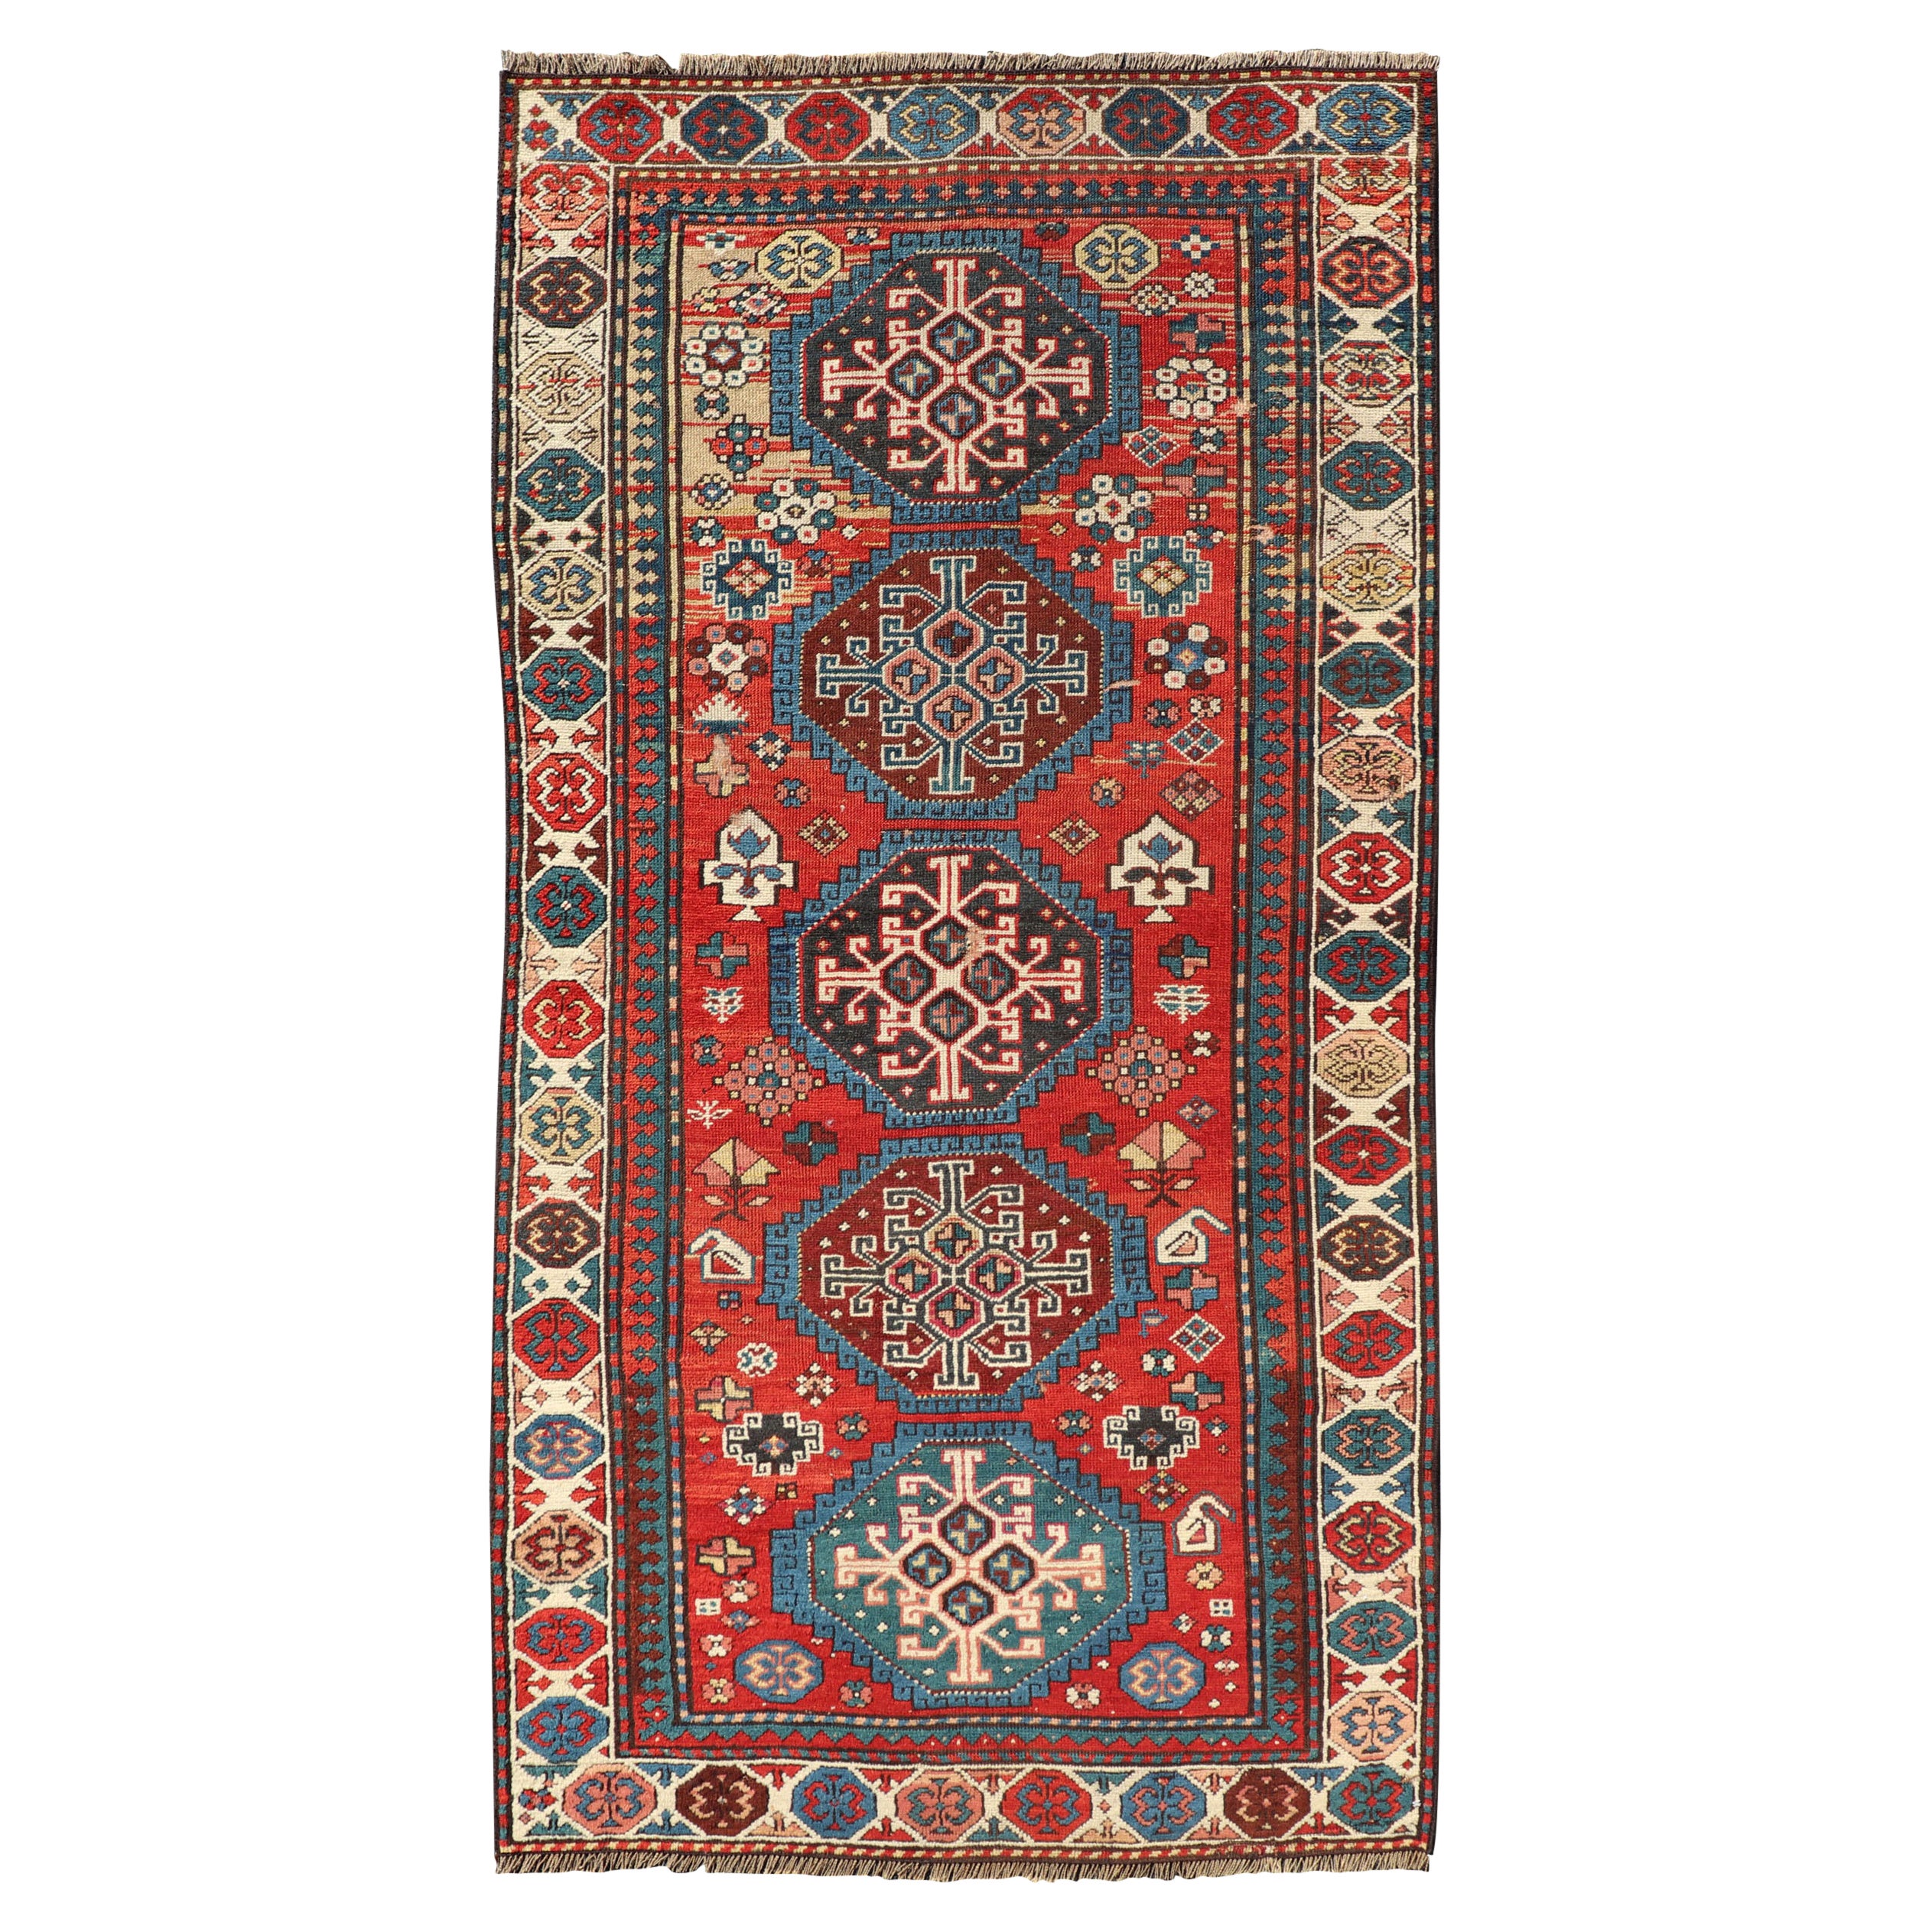 Antique Hand Knotted Caucasian Kazak Rug in Brilliant Red with Geometric Design